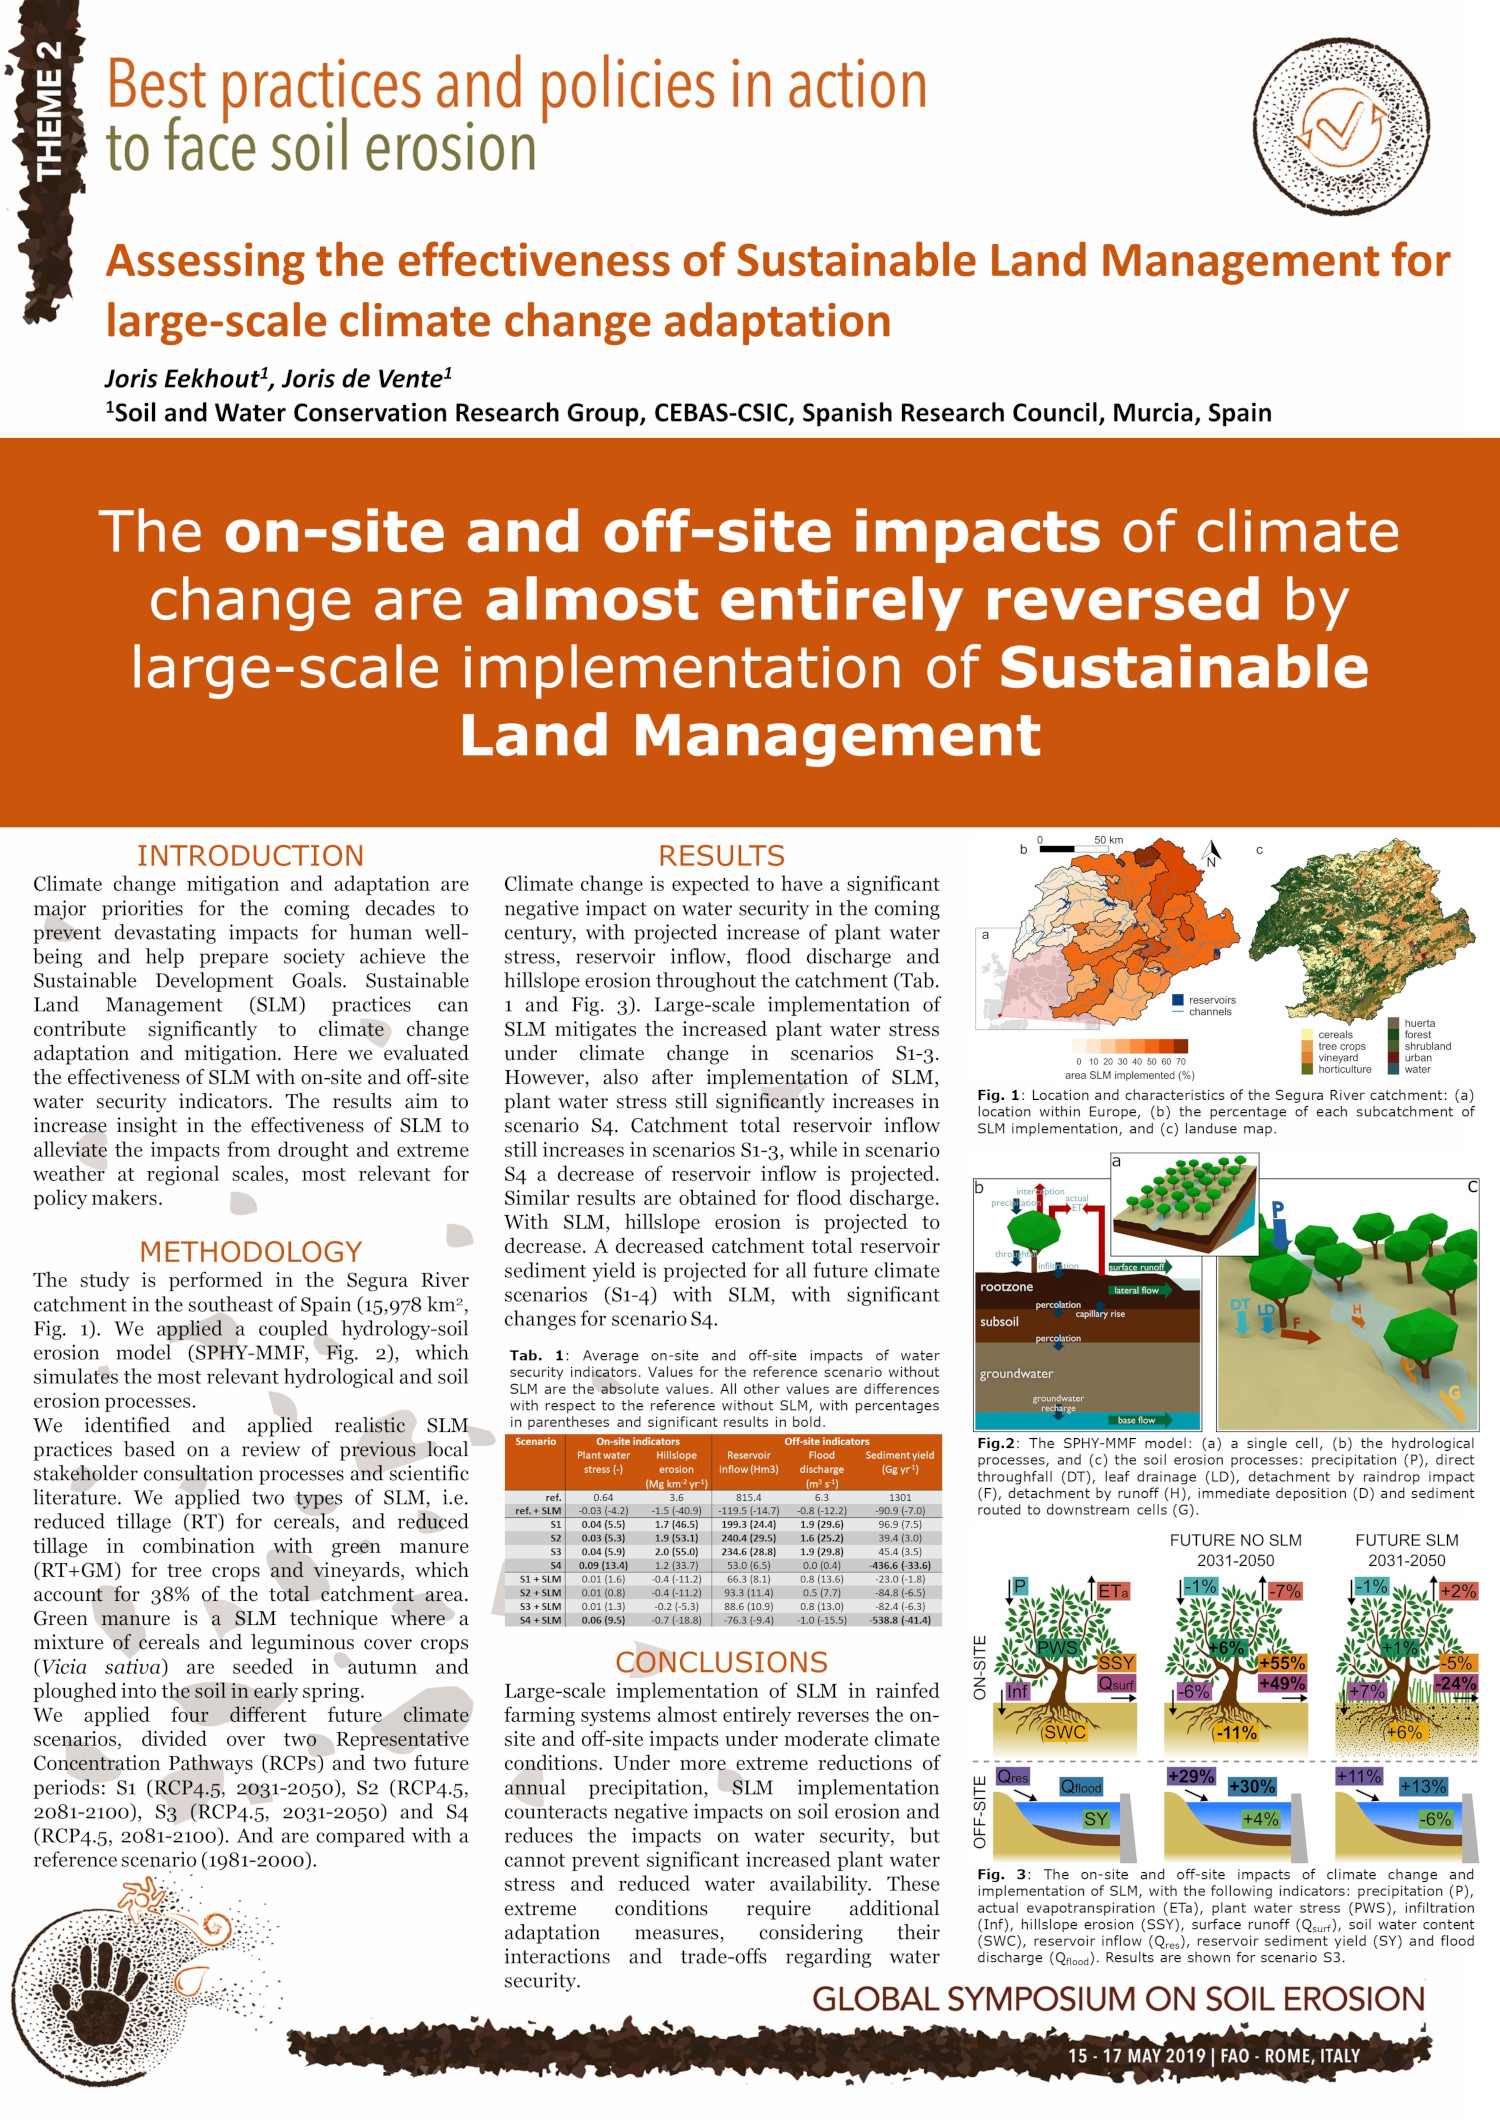 Assessing the effectiveness of Sustainable Land Management for large-scale climate change adaptation